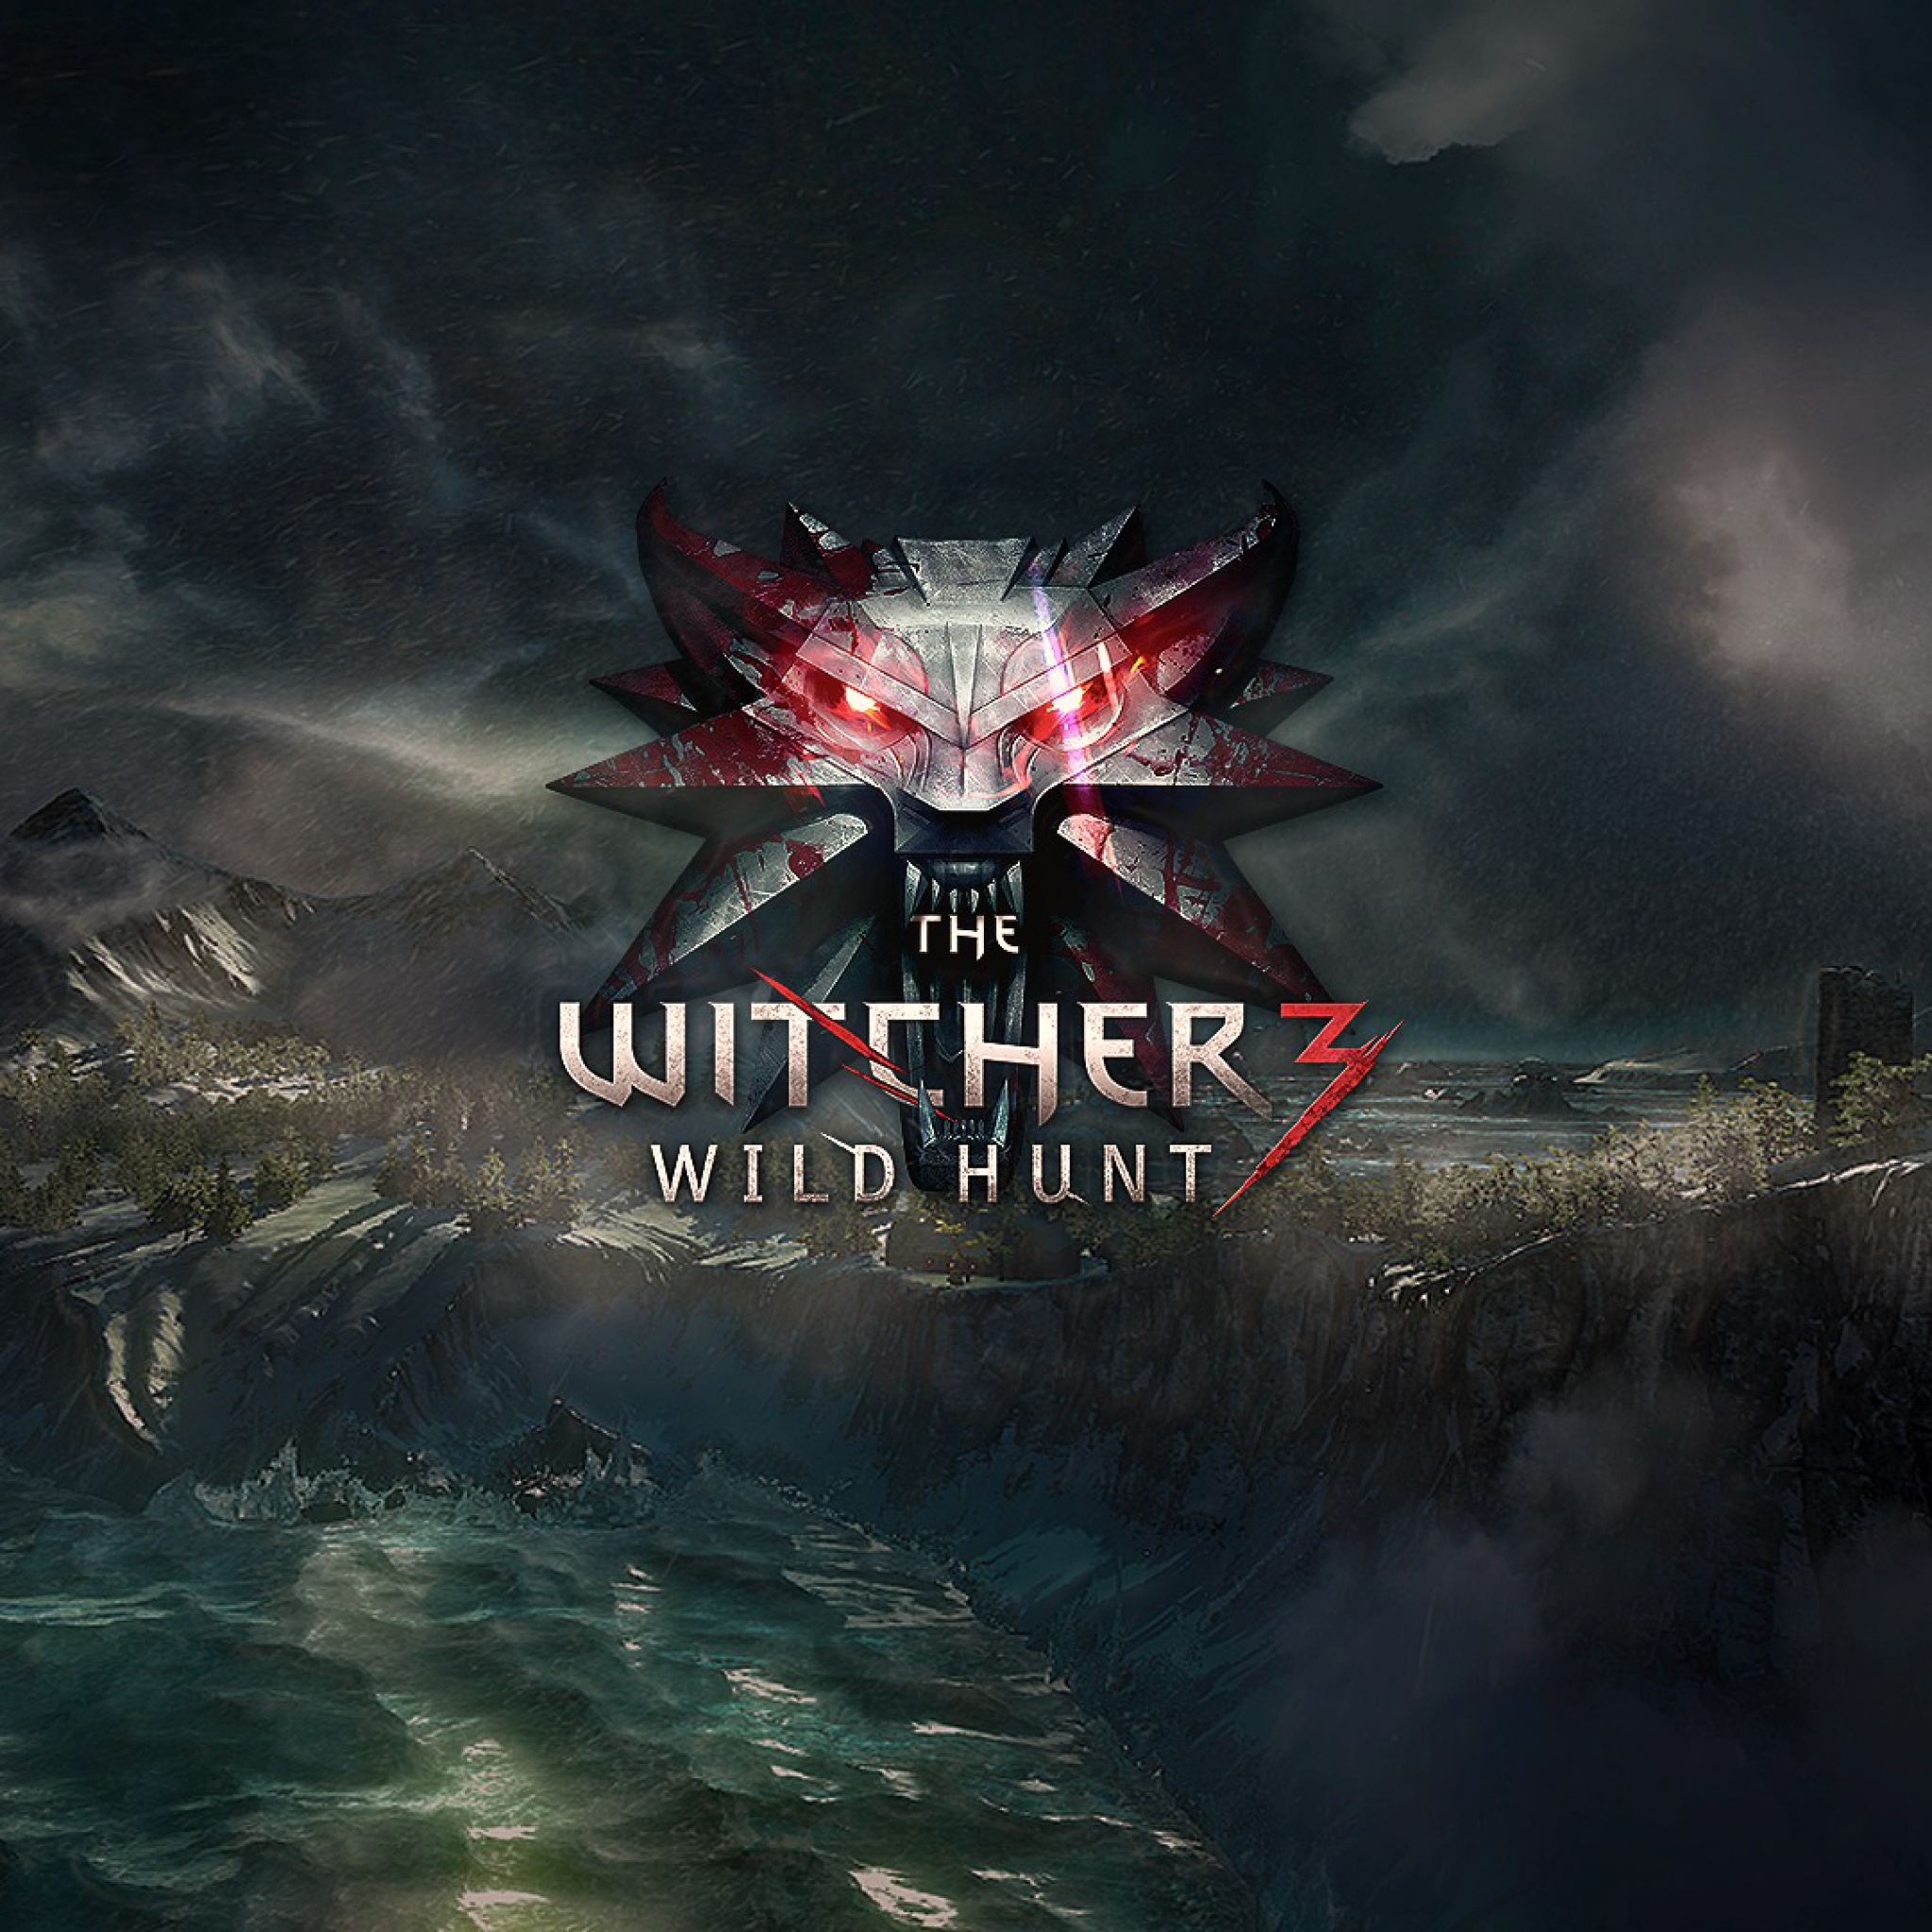 Download Wallpaper 2048x2048 The witcher 3, Wild hunt, Logo New